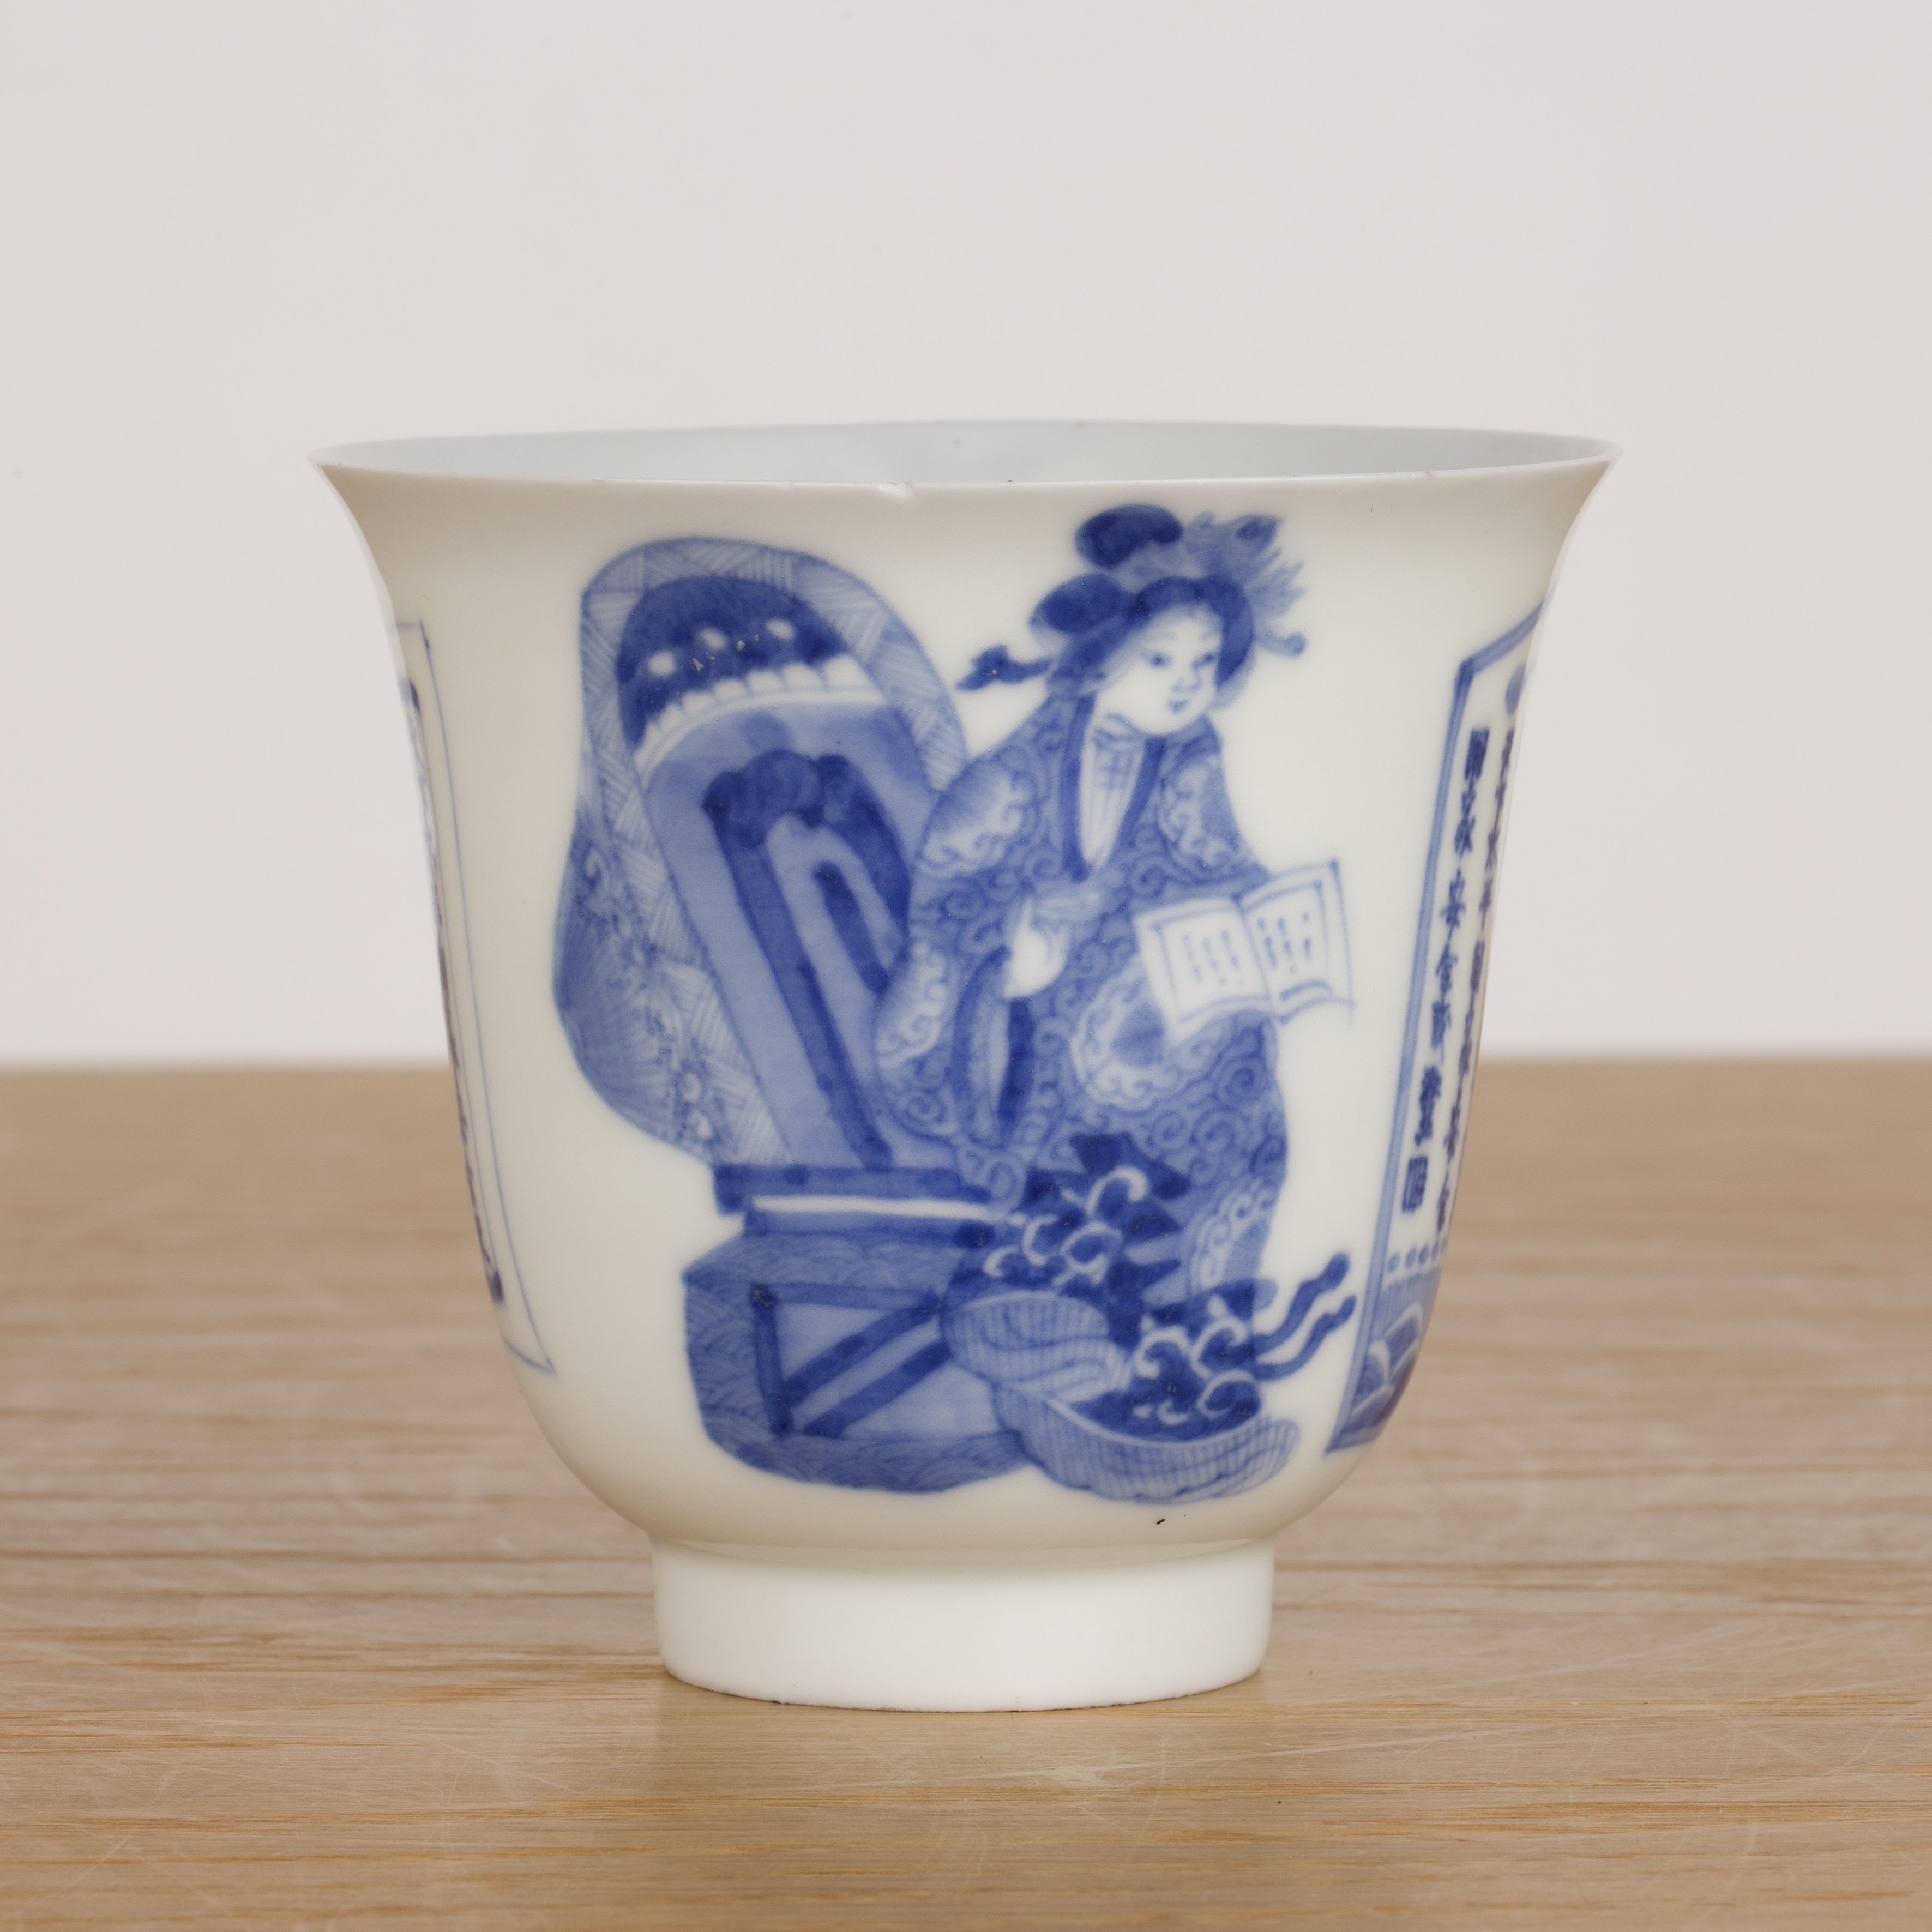 Blue and white porcelain beaker Chinese painted with a warrior and other figures, inscription and - Image 2 of 6